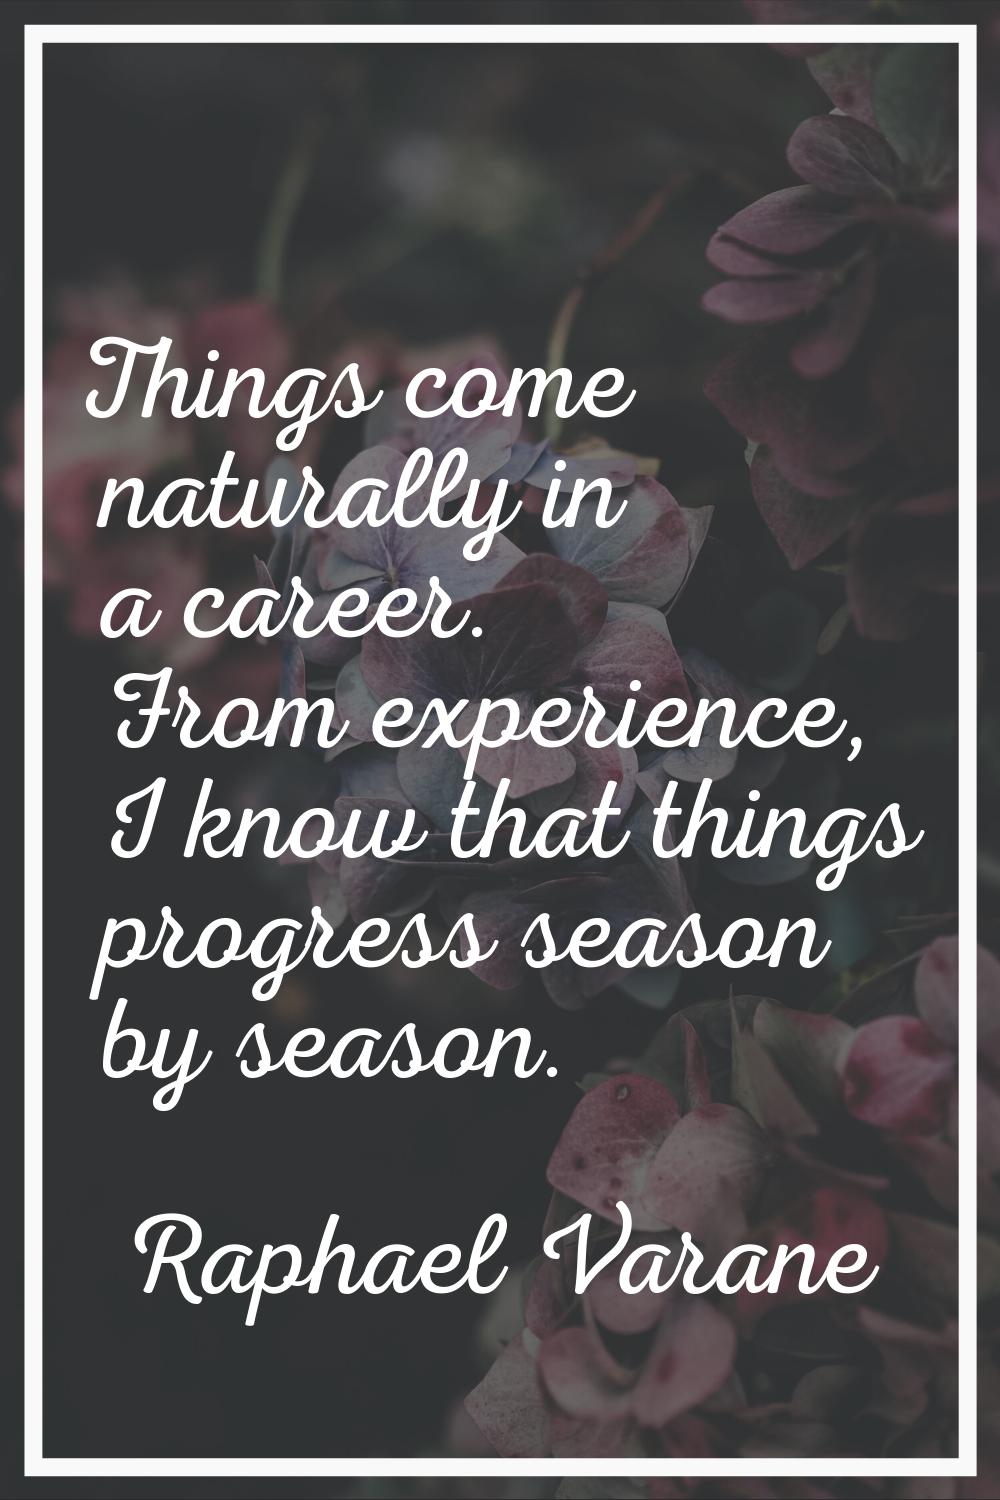 Things come naturally in a career. From experience, I know that things progress season by season.